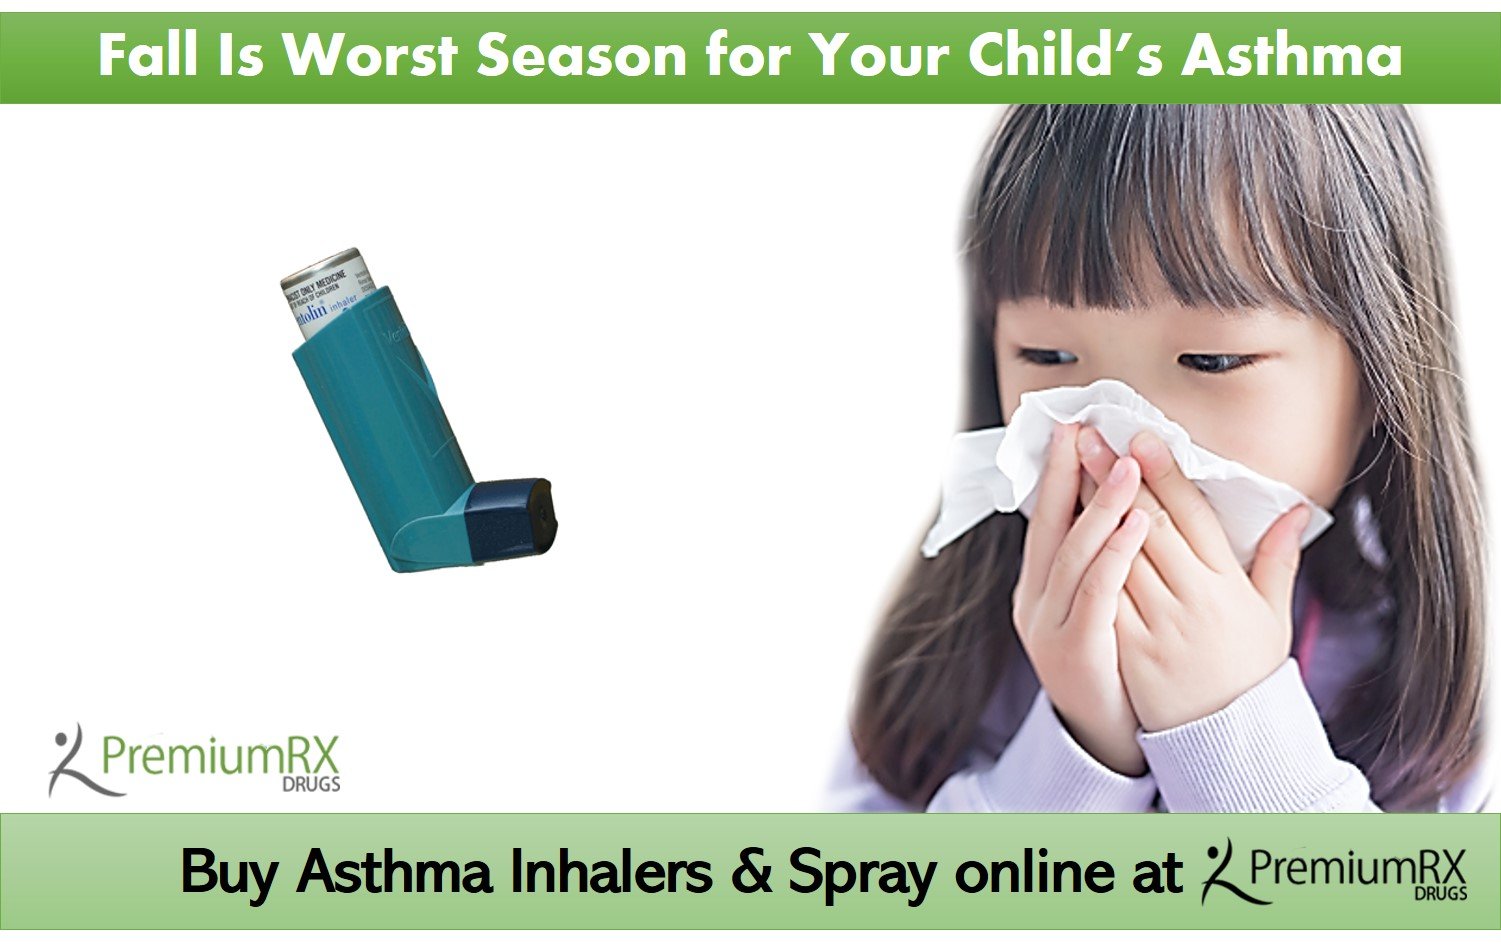 Why Fall Is Worst Season for Your Childâs Asthma